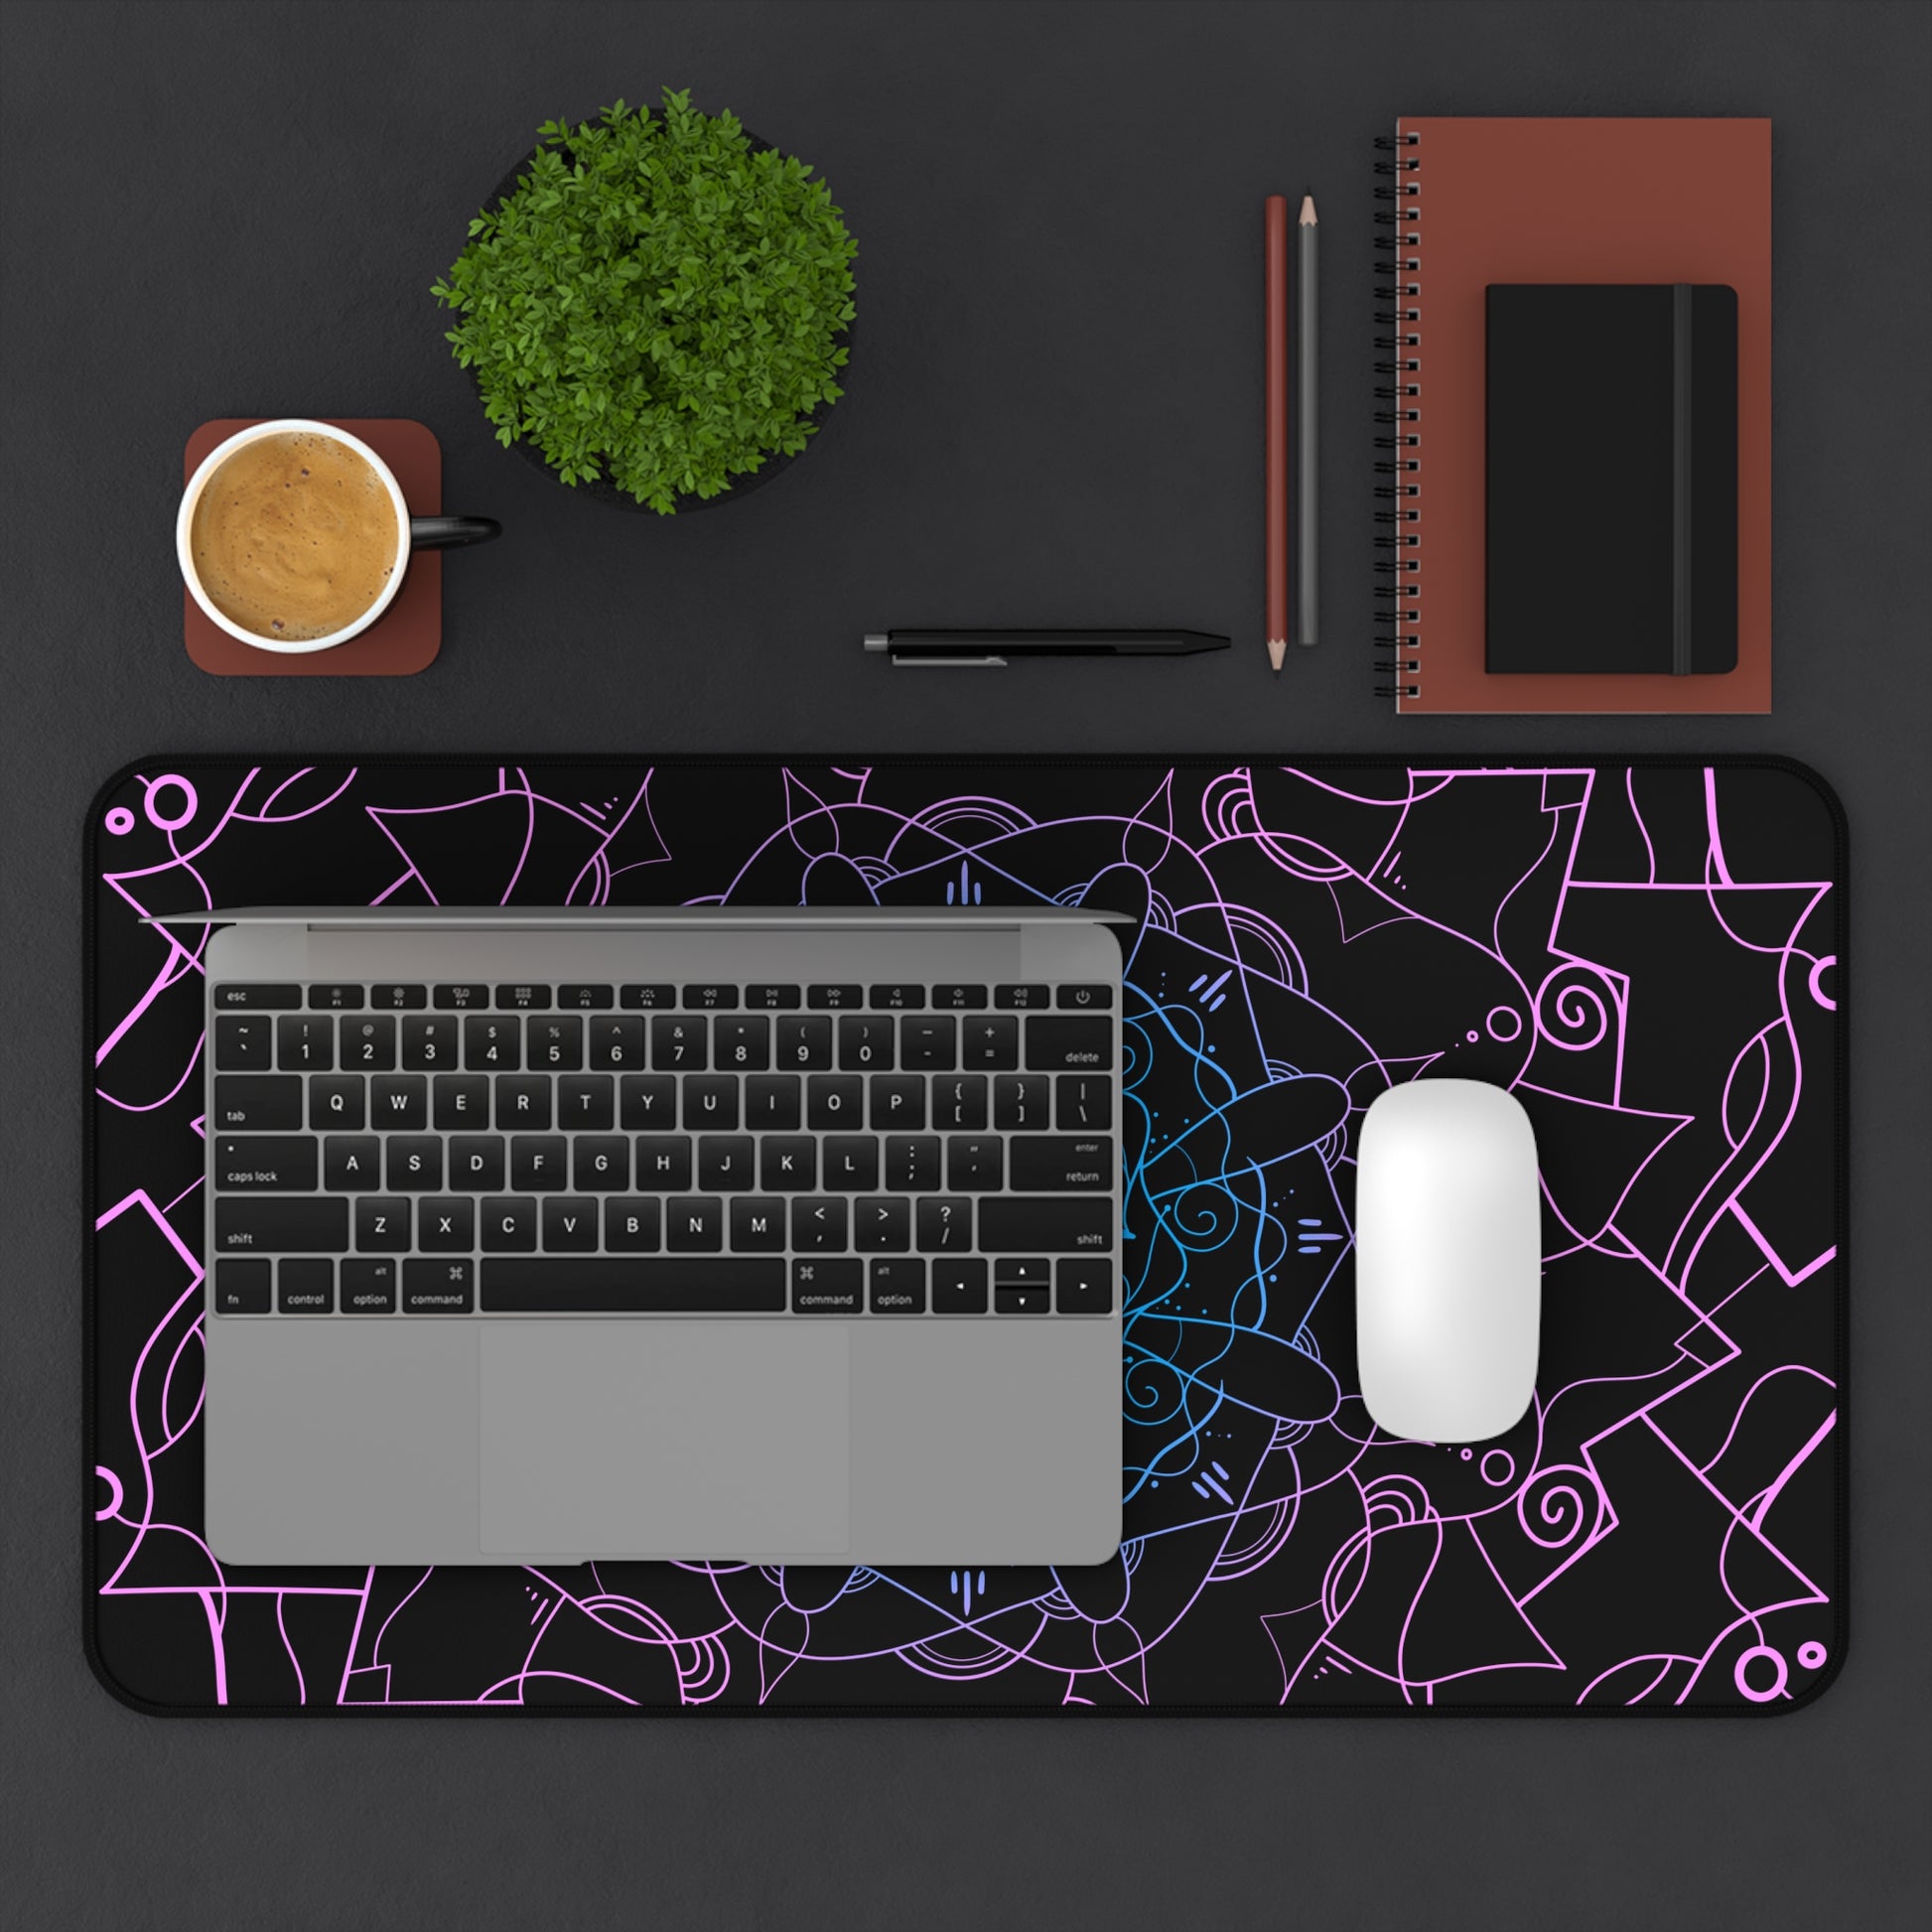 A 12" x 22" desk mat with a pink and blue mandala pattern on a black background. A laptop and mouse sit on top of it.